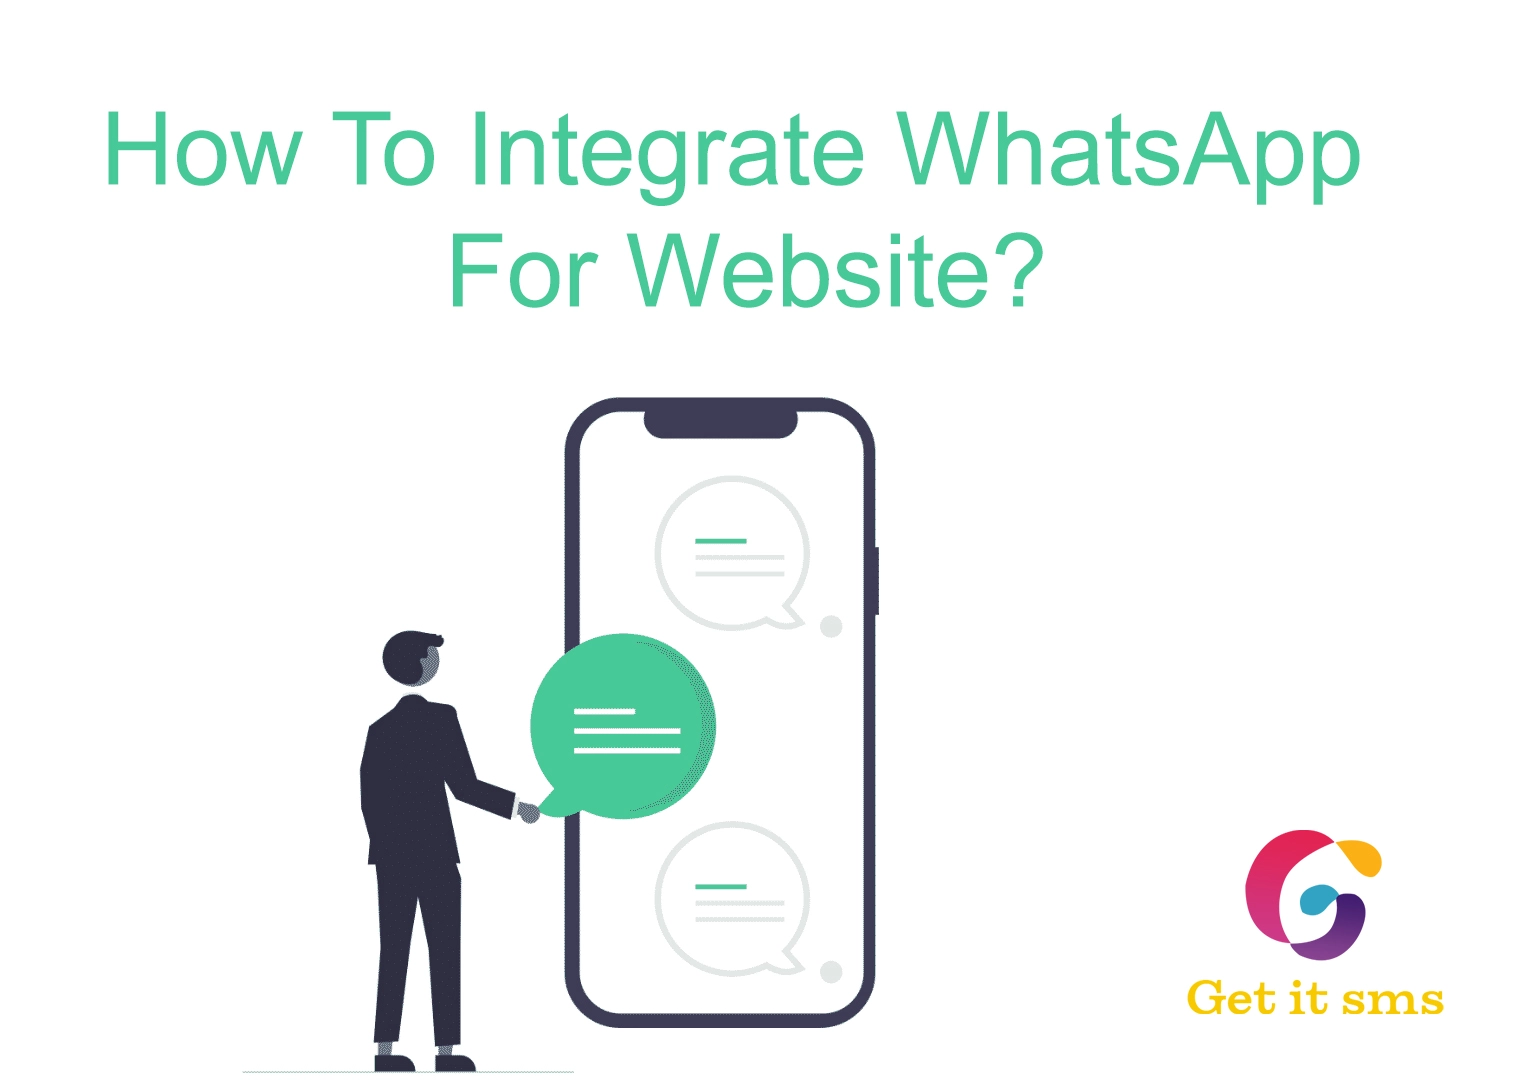 How To Integrate WhatsApp For Website: Step-by-Step Guide!